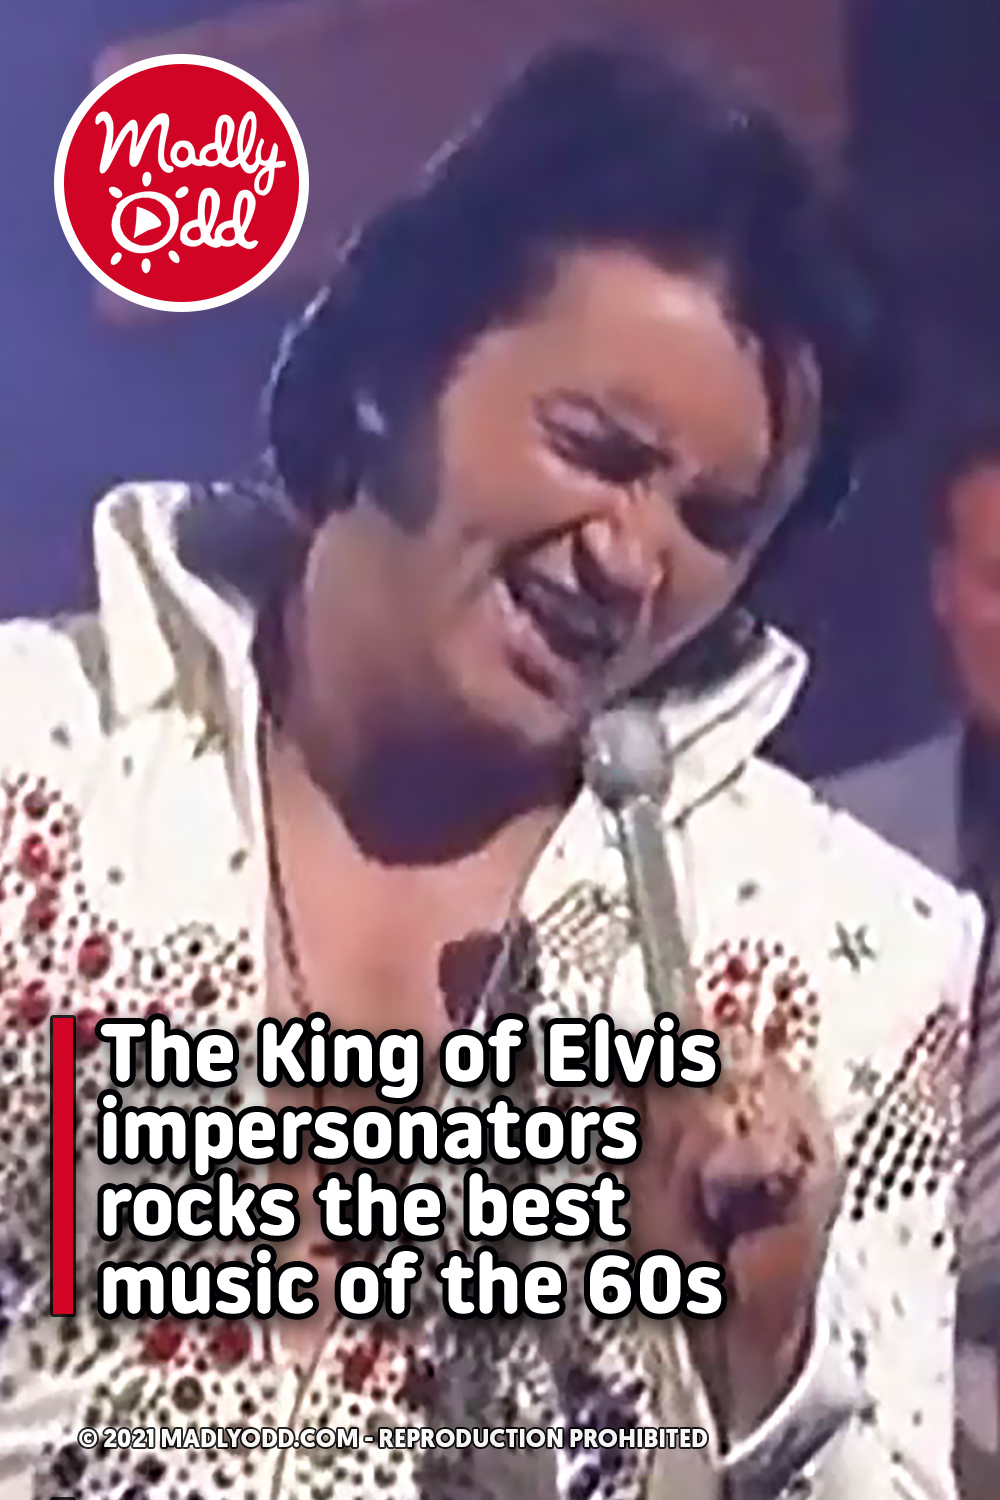 The King of Elvis impersonators rocks the best music of the 60s